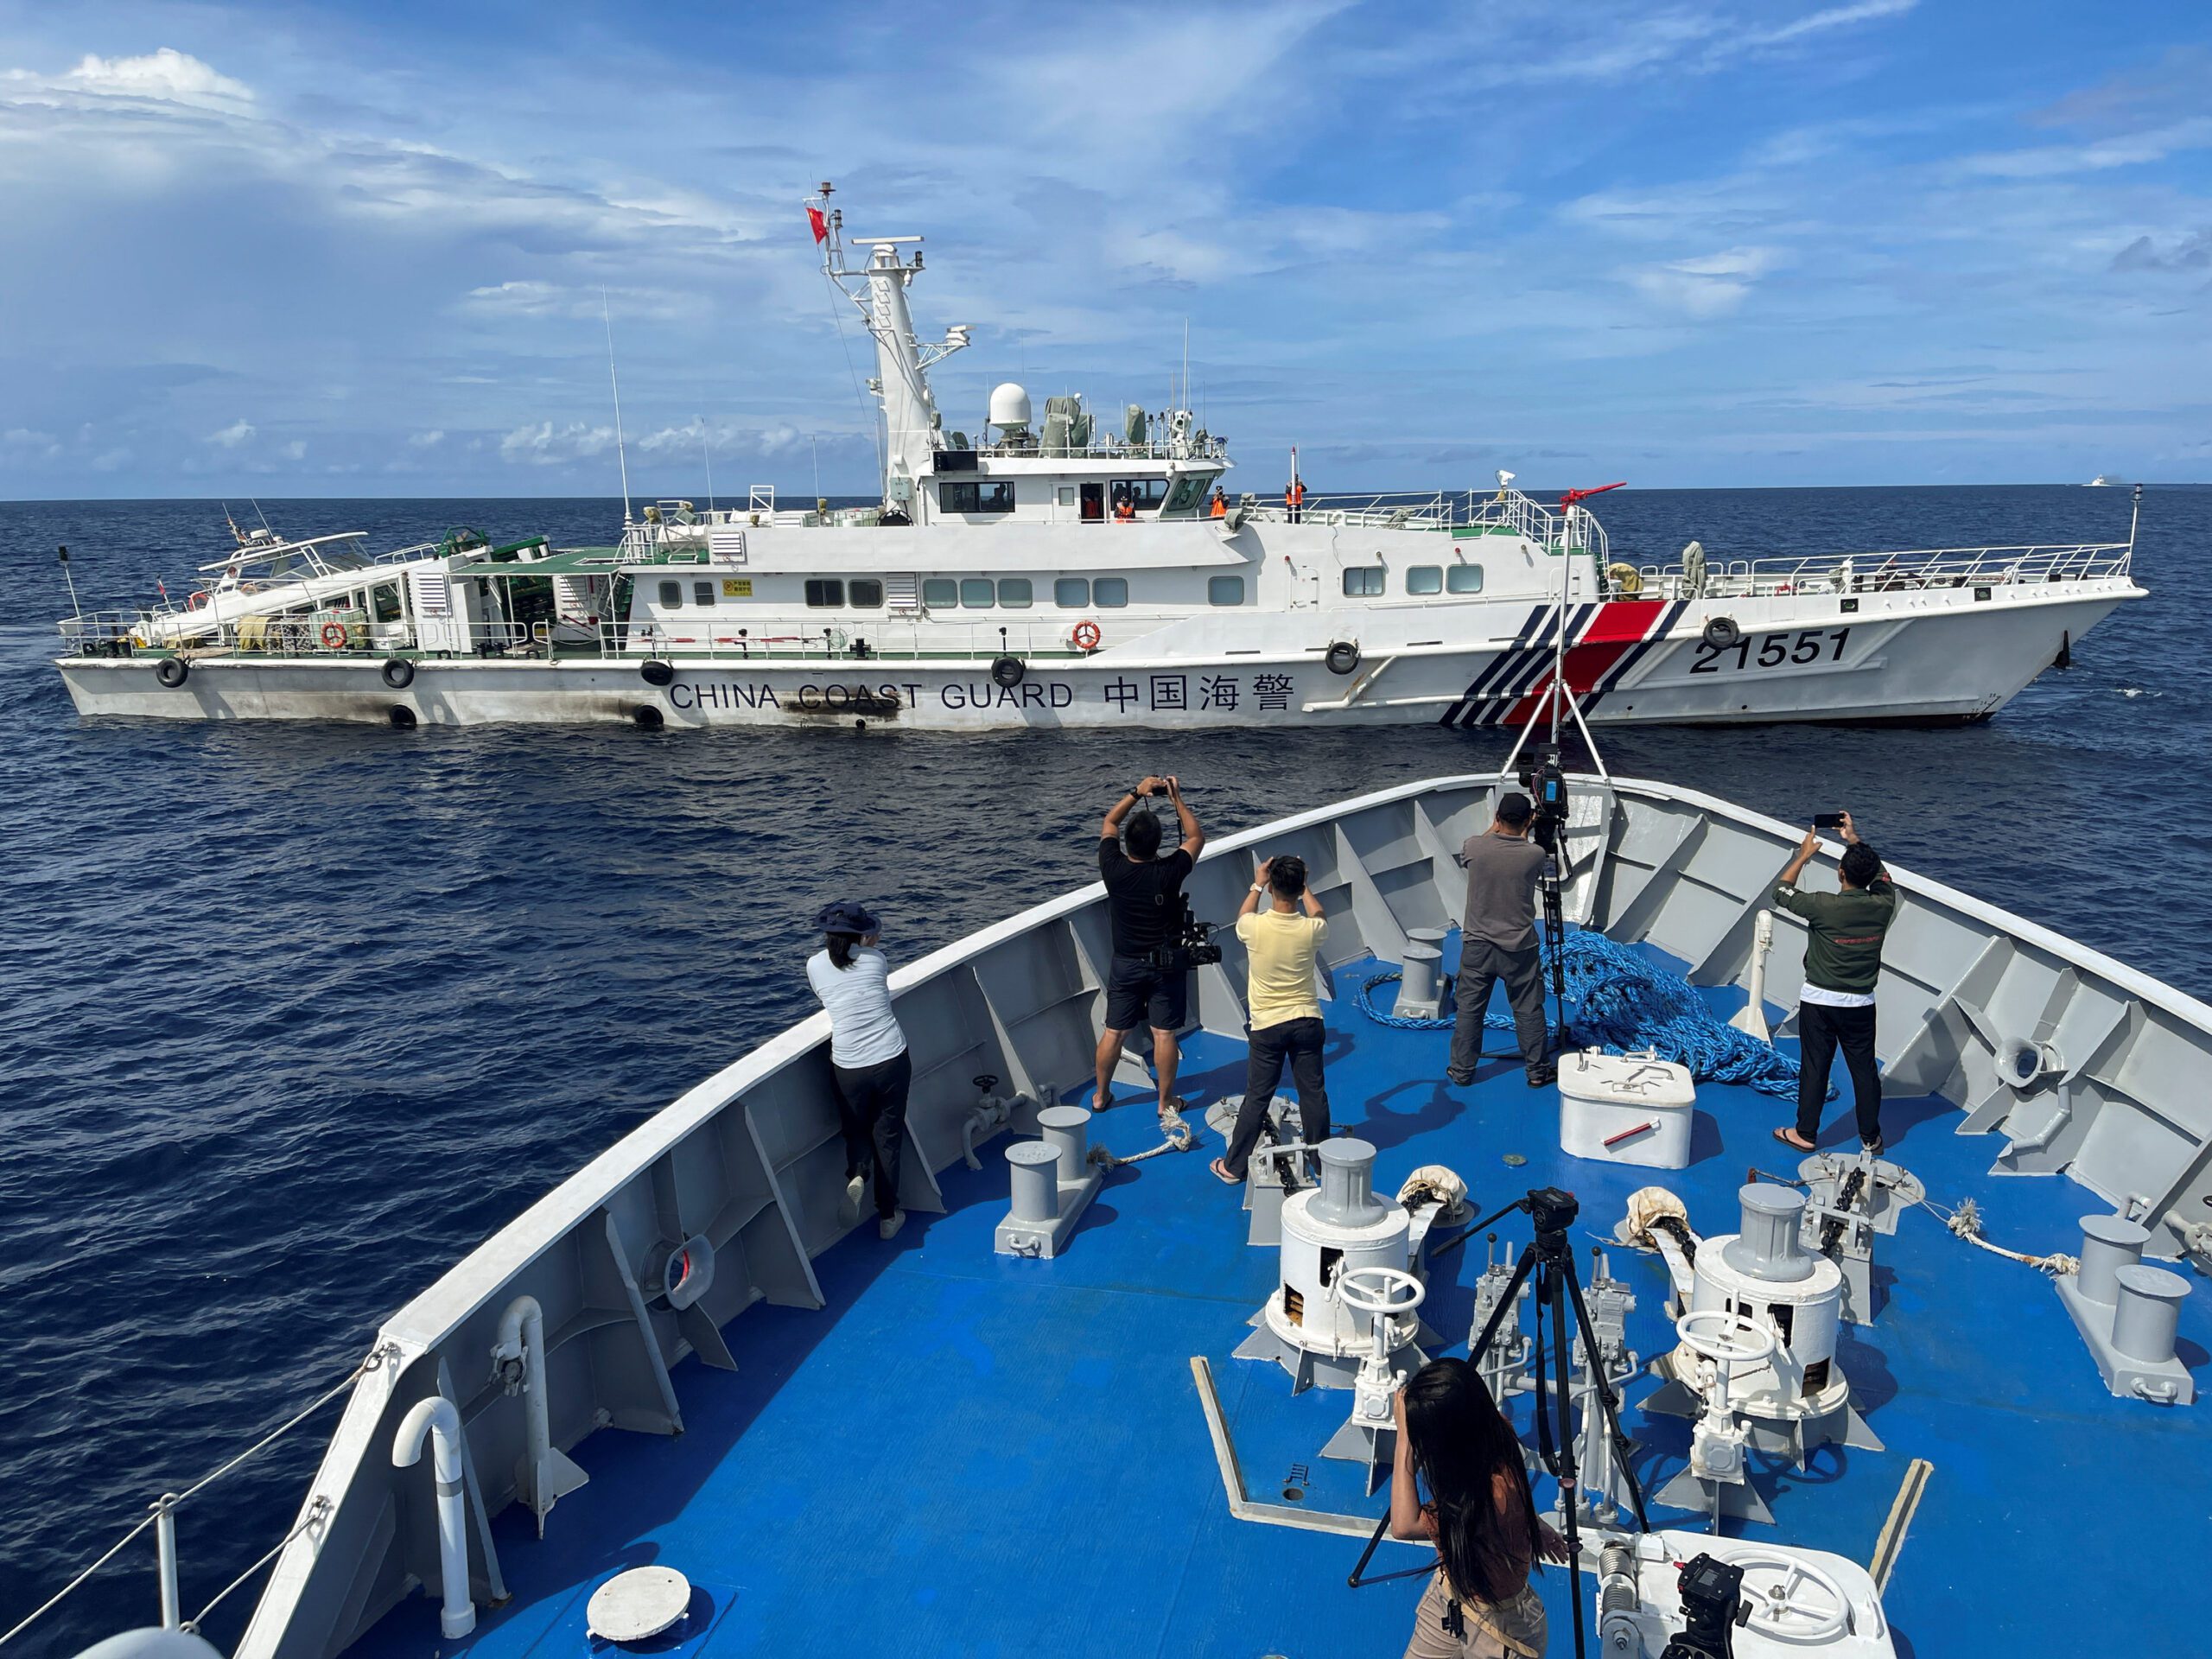 Journalists onboard a Philippines Coast Guard ship take photos of a China Coast Guard vessel, during a resupply mission for troops stationed at a grounded Philippines ship, in the South China Sea, September 8, 2023. REUTERS/Jay Ereno